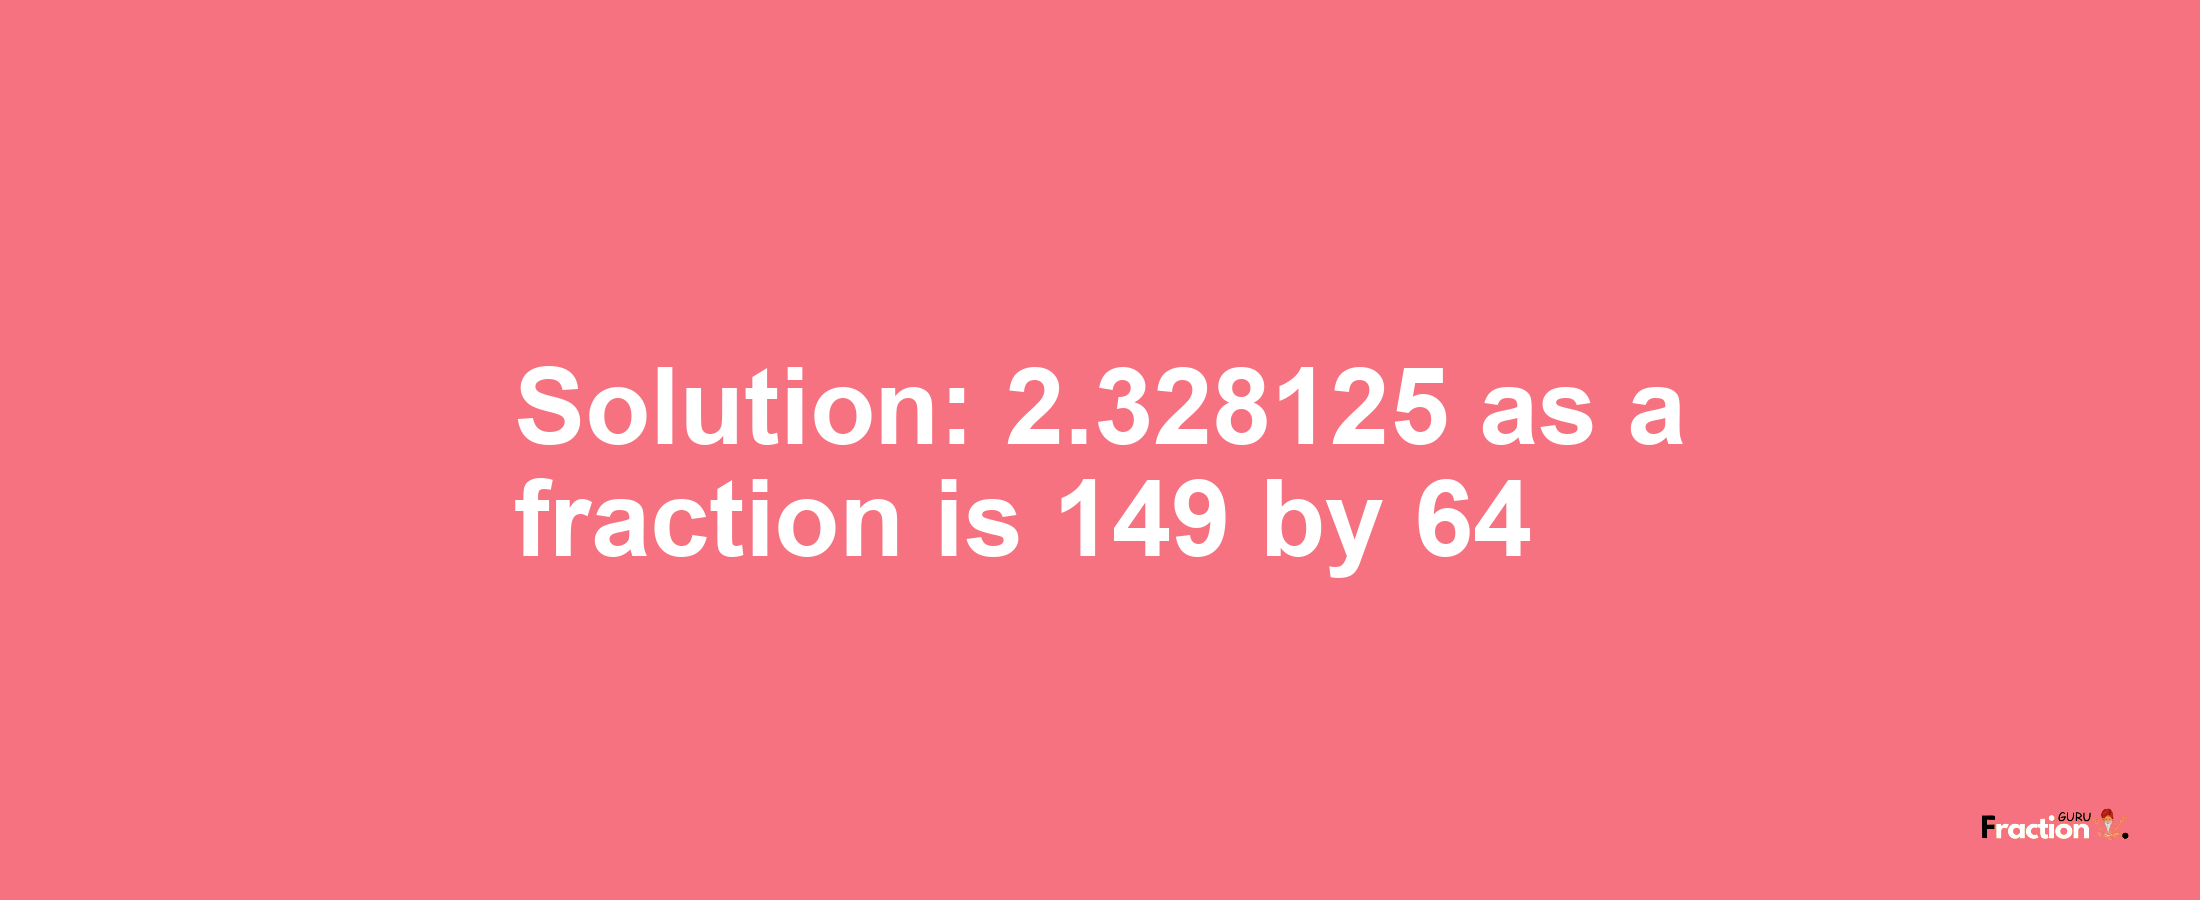 Solution:2.328125 as a fraction is 149/64